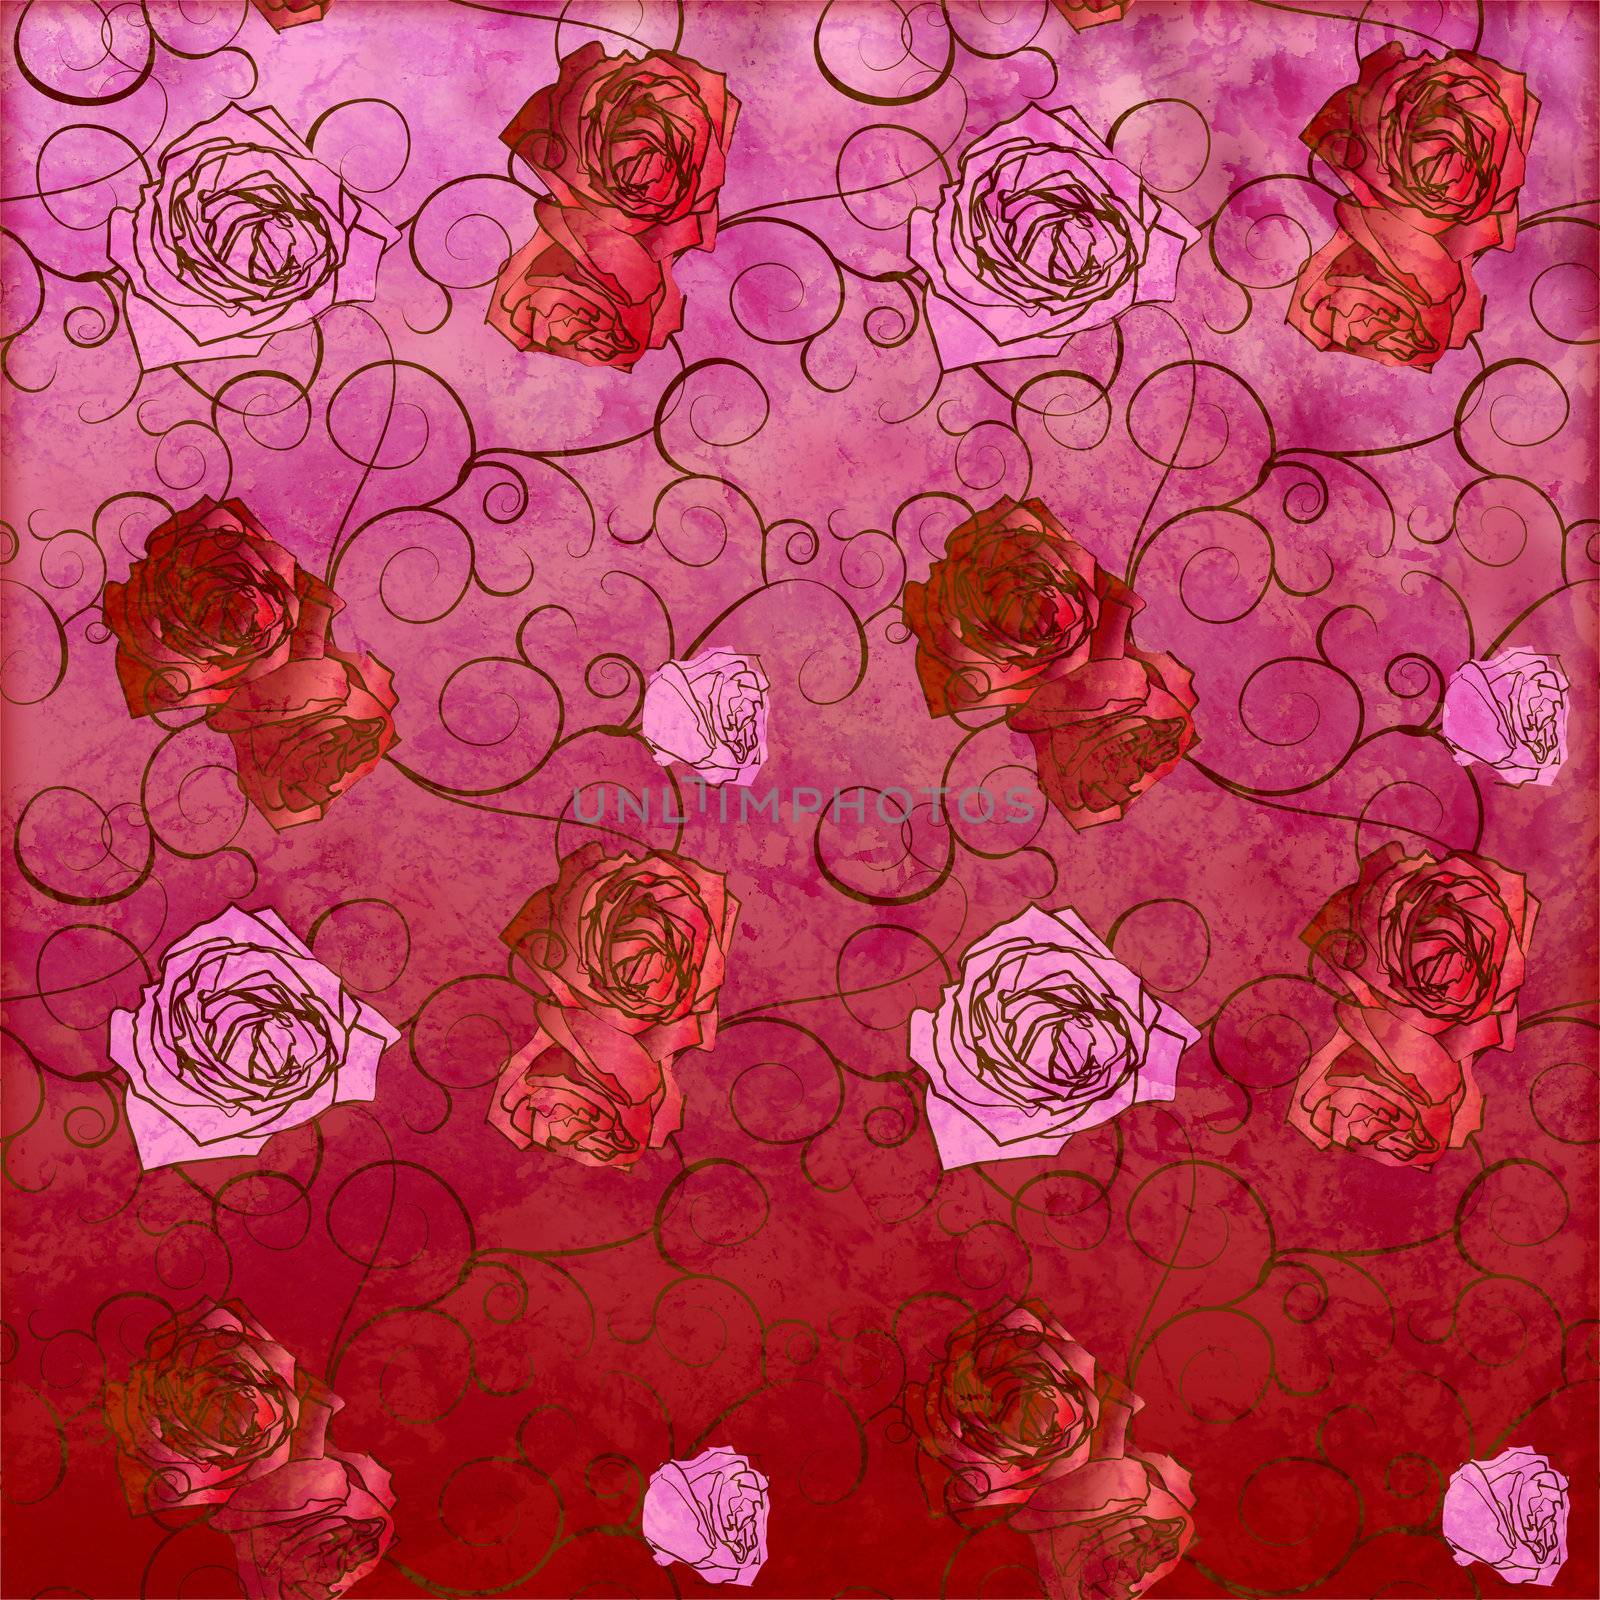 red roses vintage style pattern with grunge effect